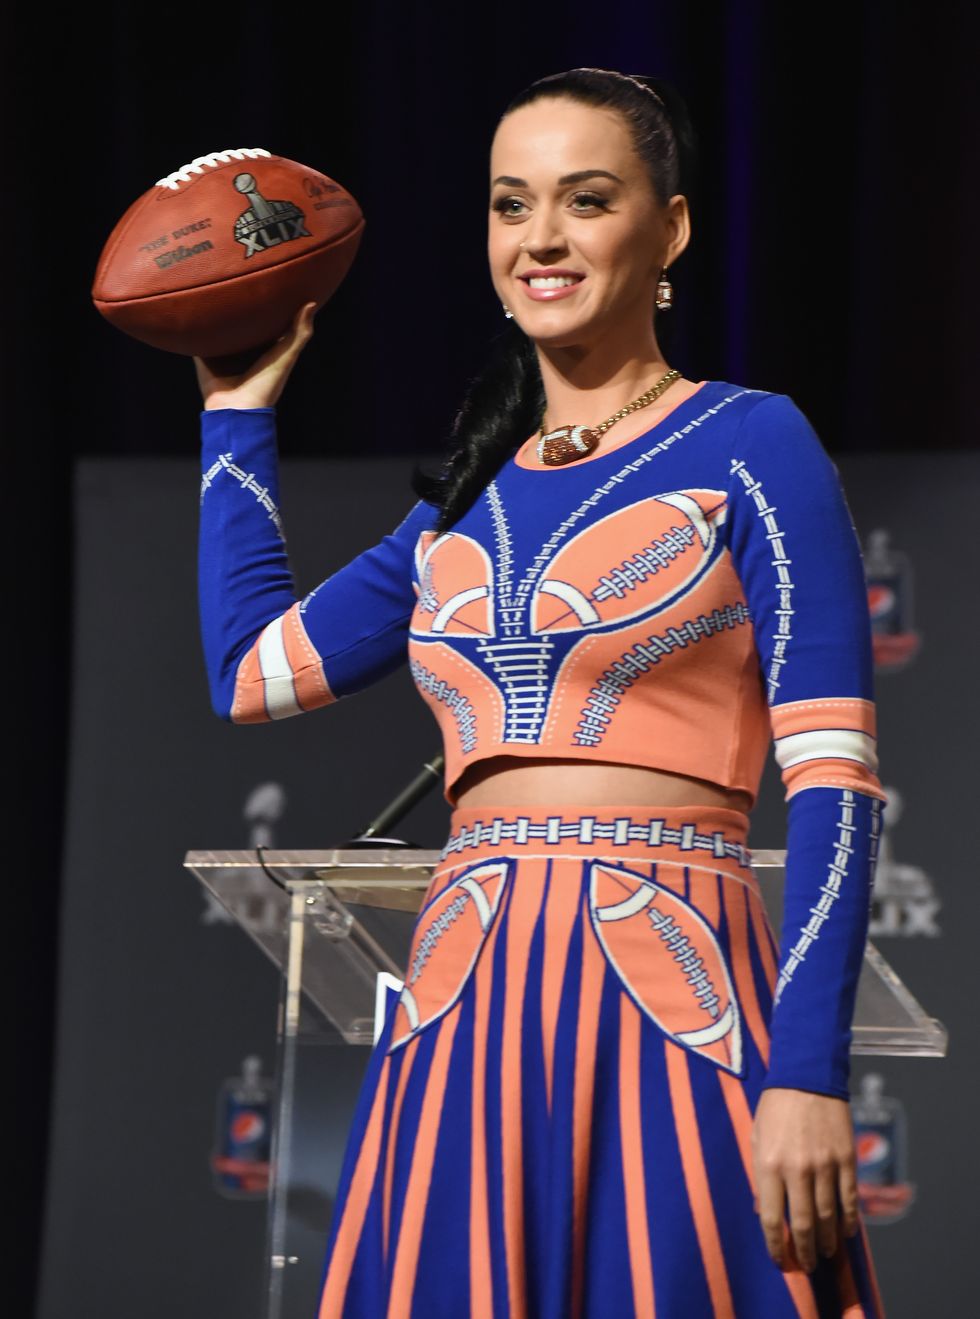 Katy Perry at the American Super Bowl halftime press conference